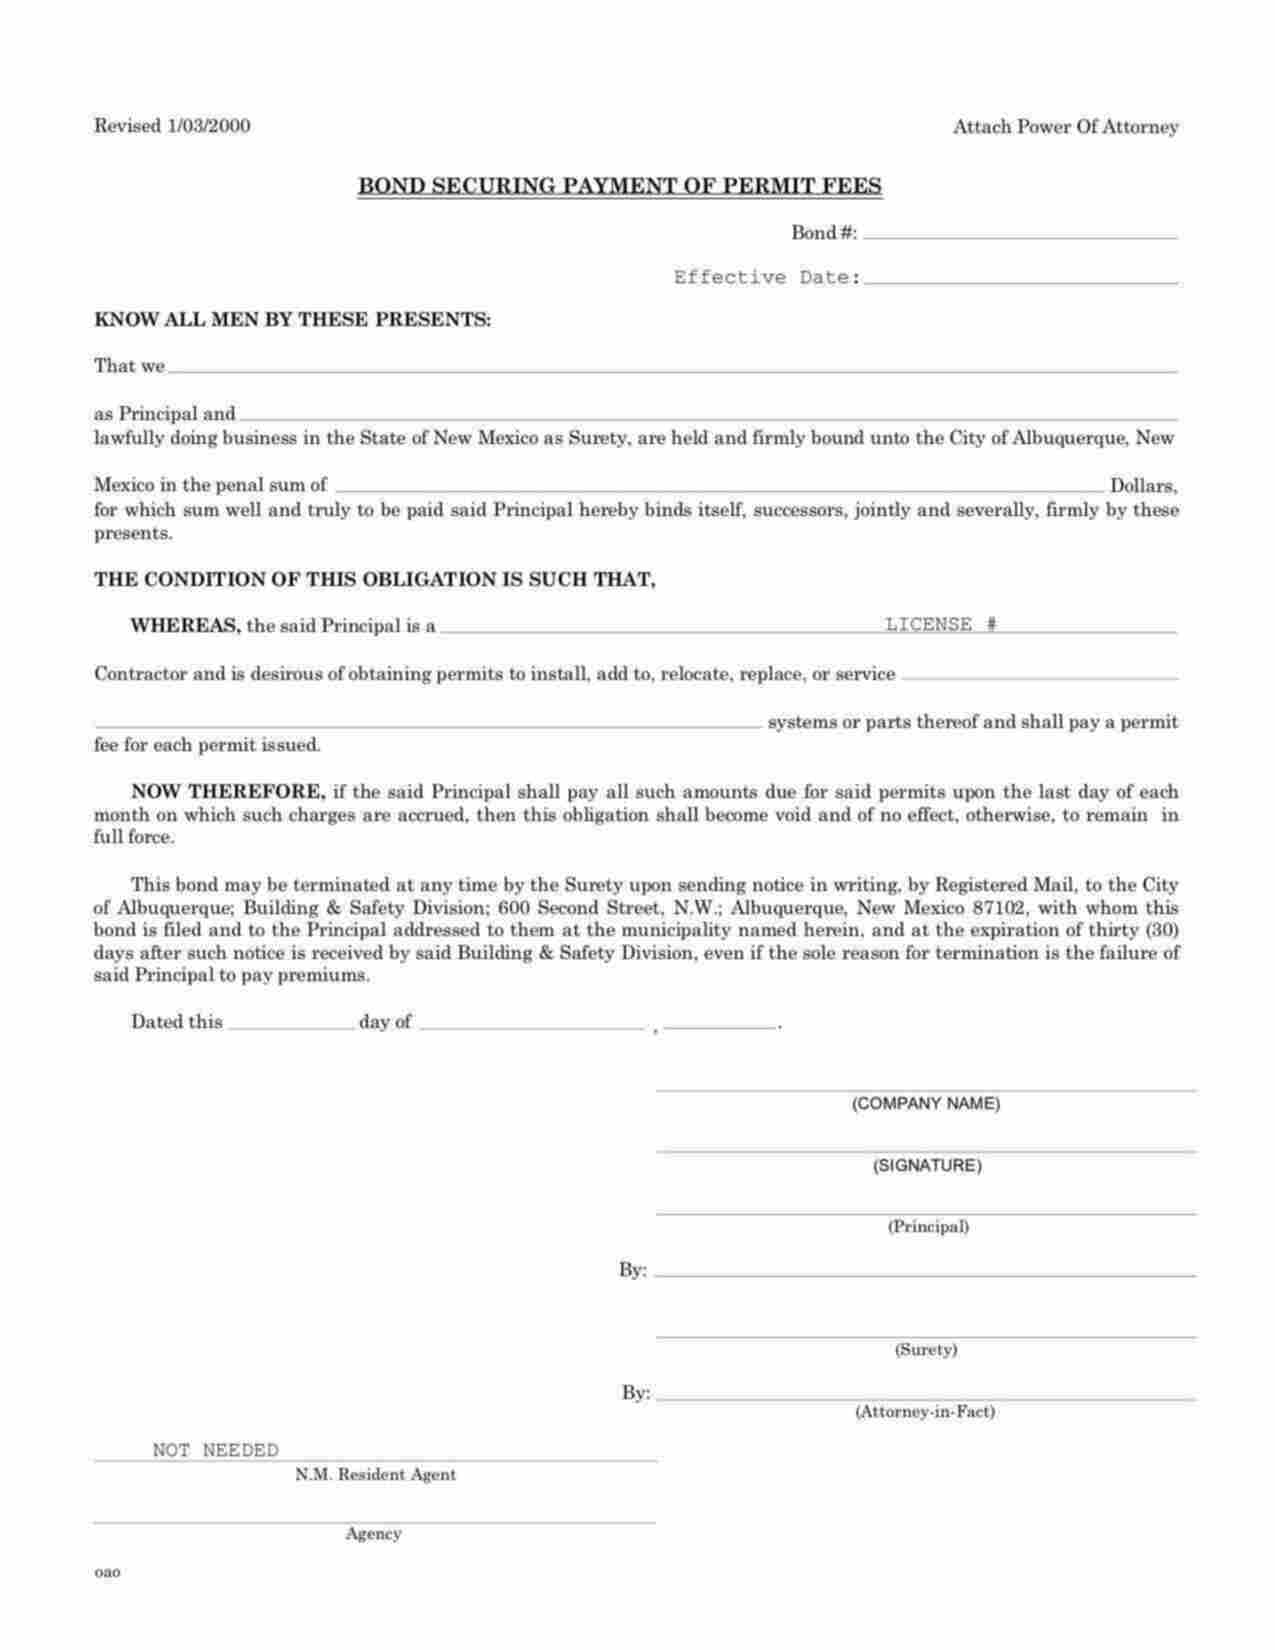 New Mexico Payment of Permit Fees for Building & Safety Division Bond Form